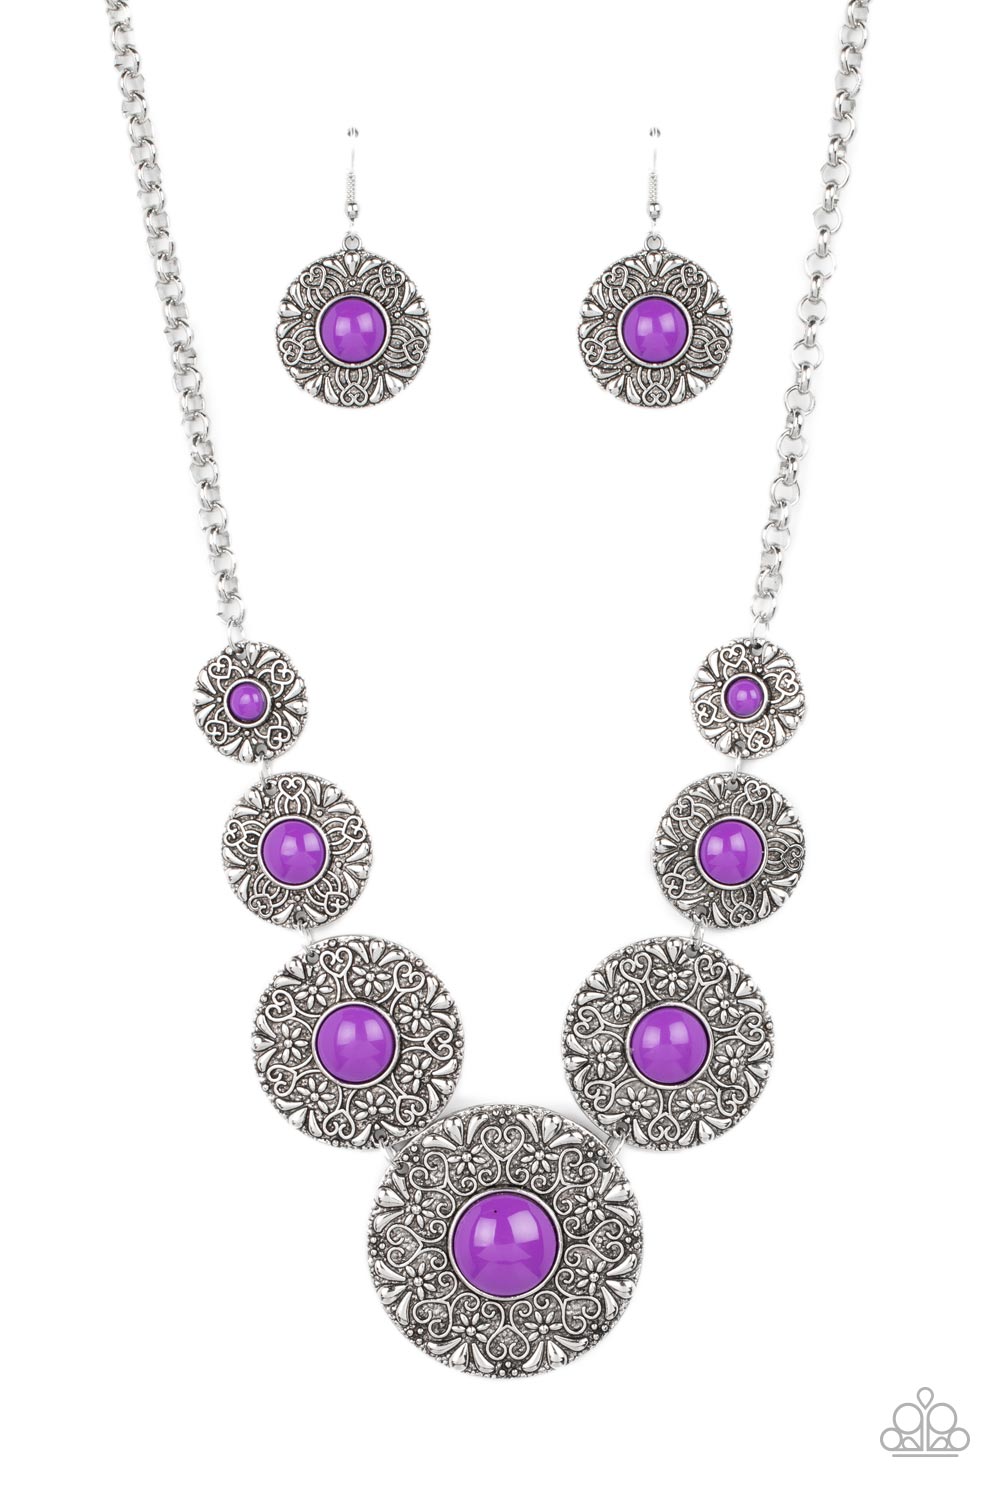 Garden Glade - Purple and Silver Necklace - Paparazzi Accessories - Dotted with Dahlia beaded centers, floral embossed silver discs gradually increase in size as they link below the collar for a flowery pop of color necklace.